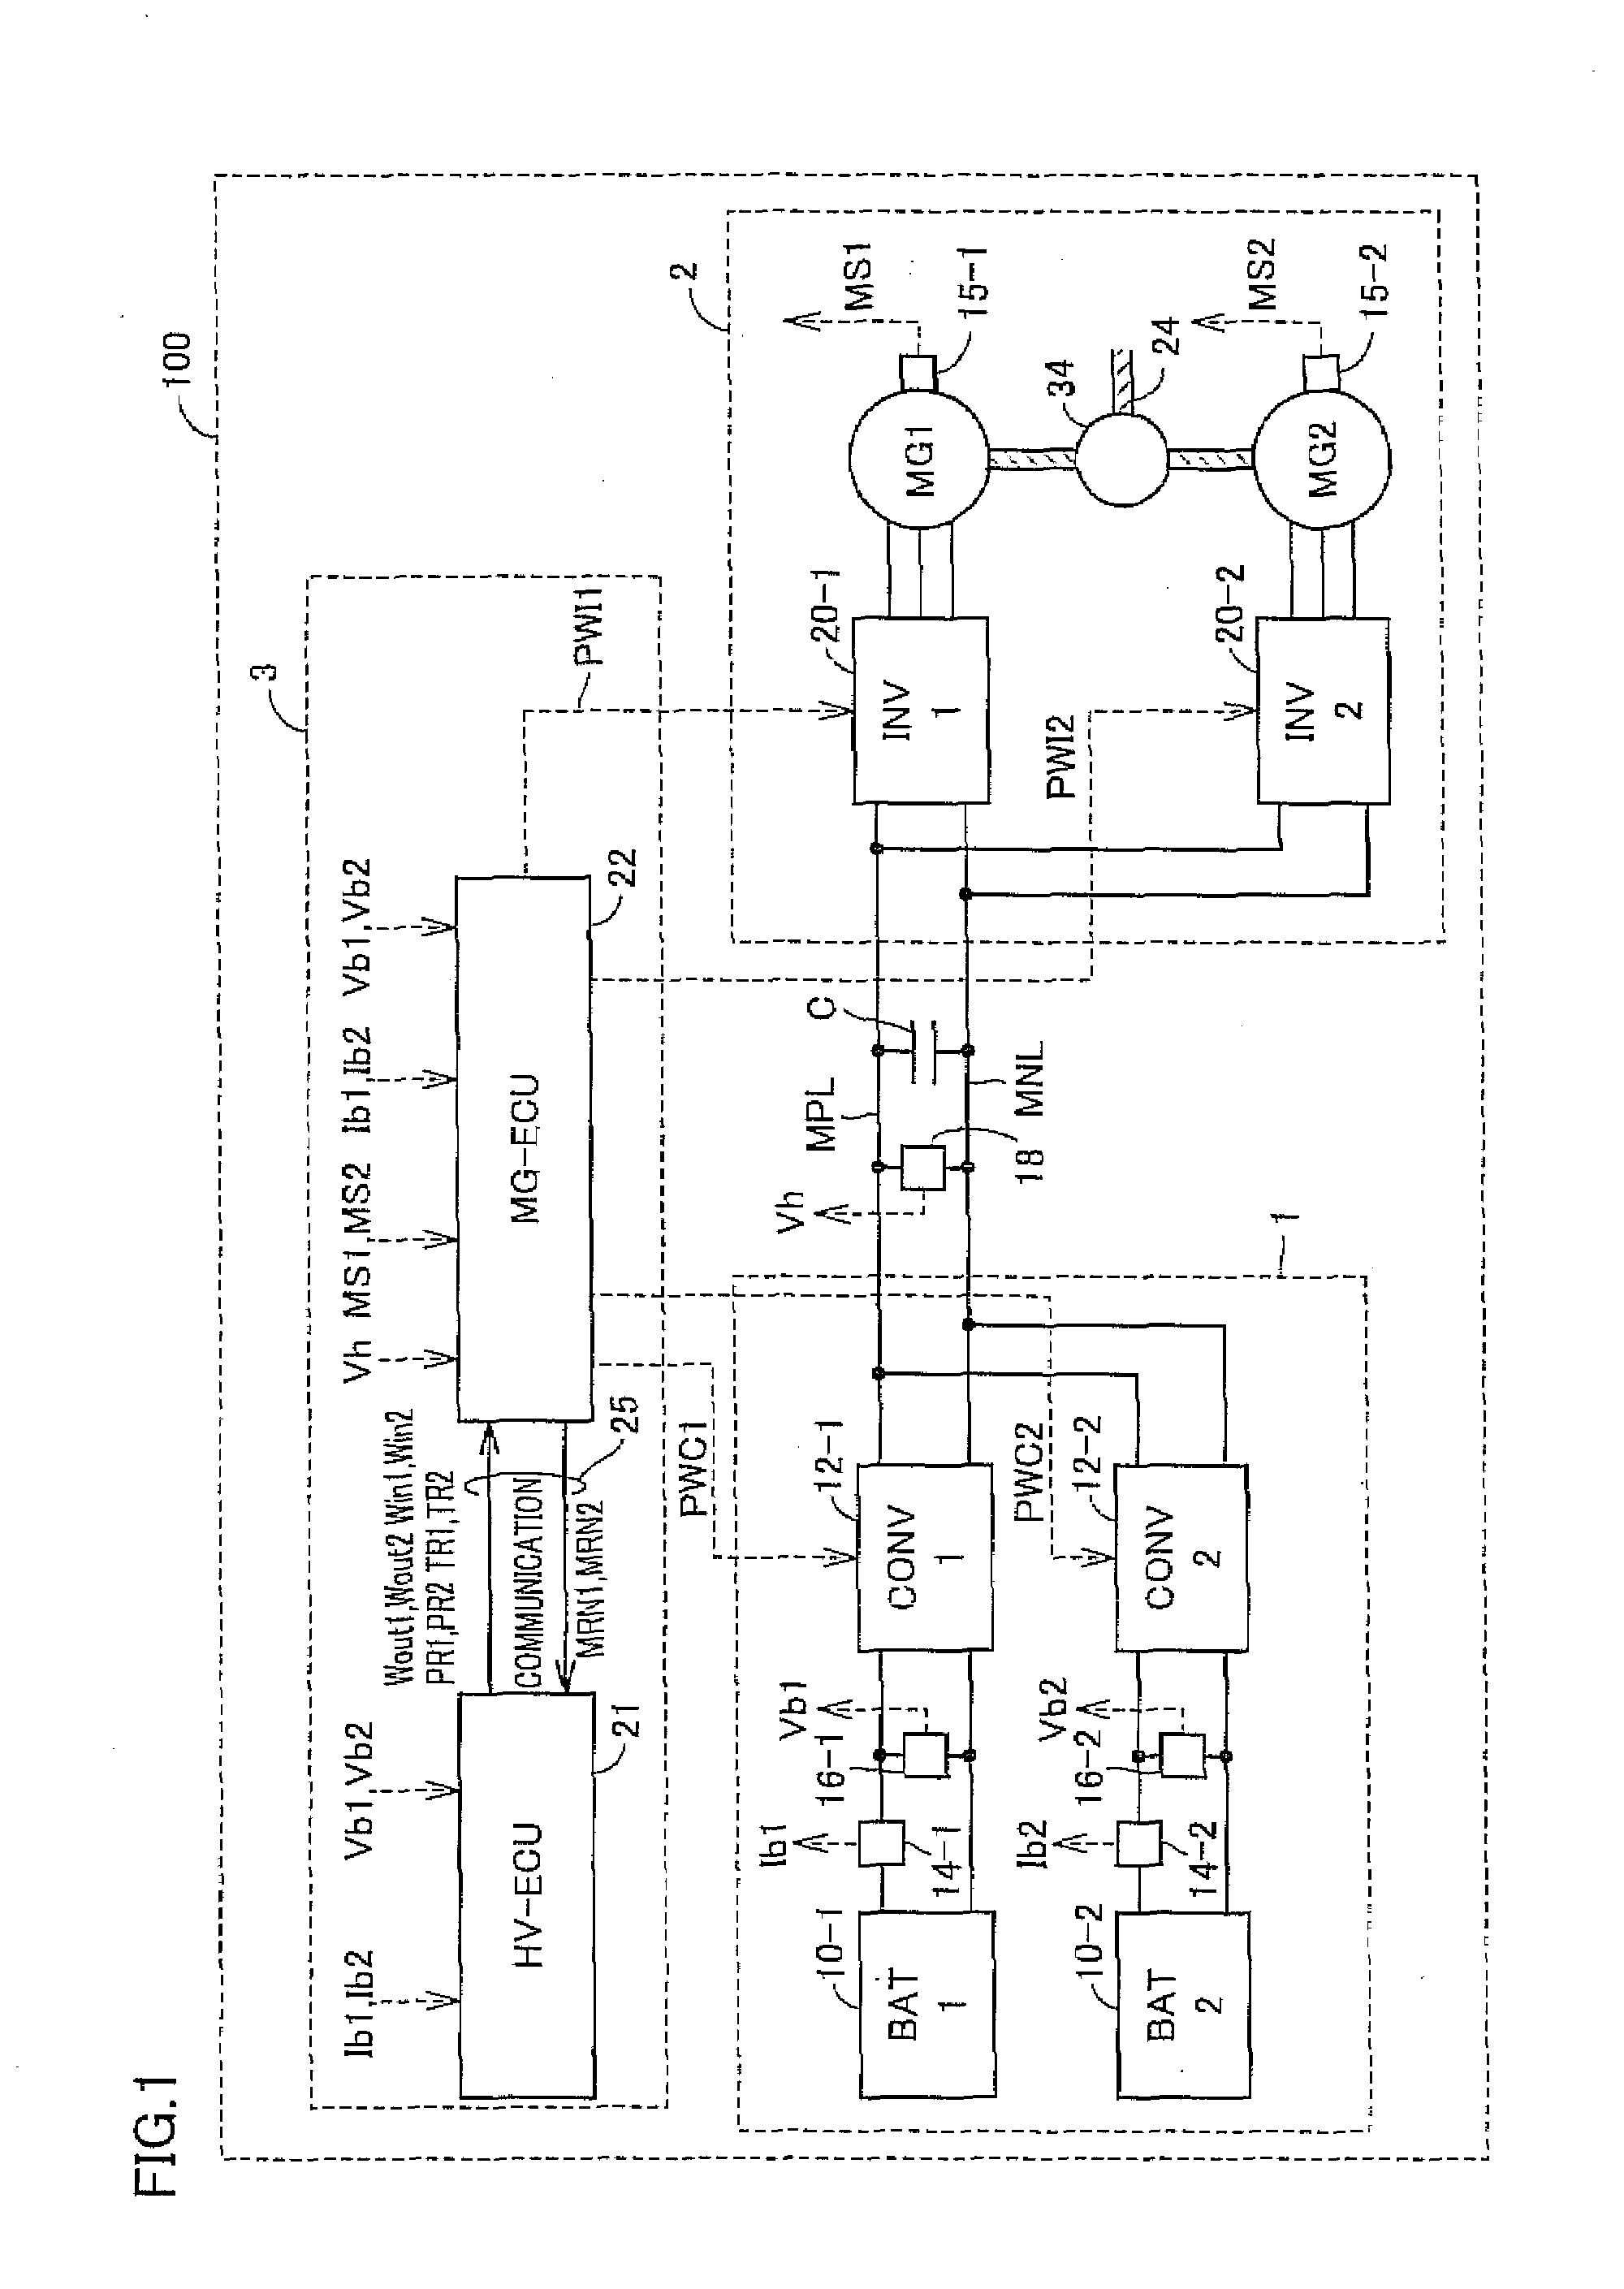 Electrical powered vehicle incorporating motor and inverter, and control method therefor